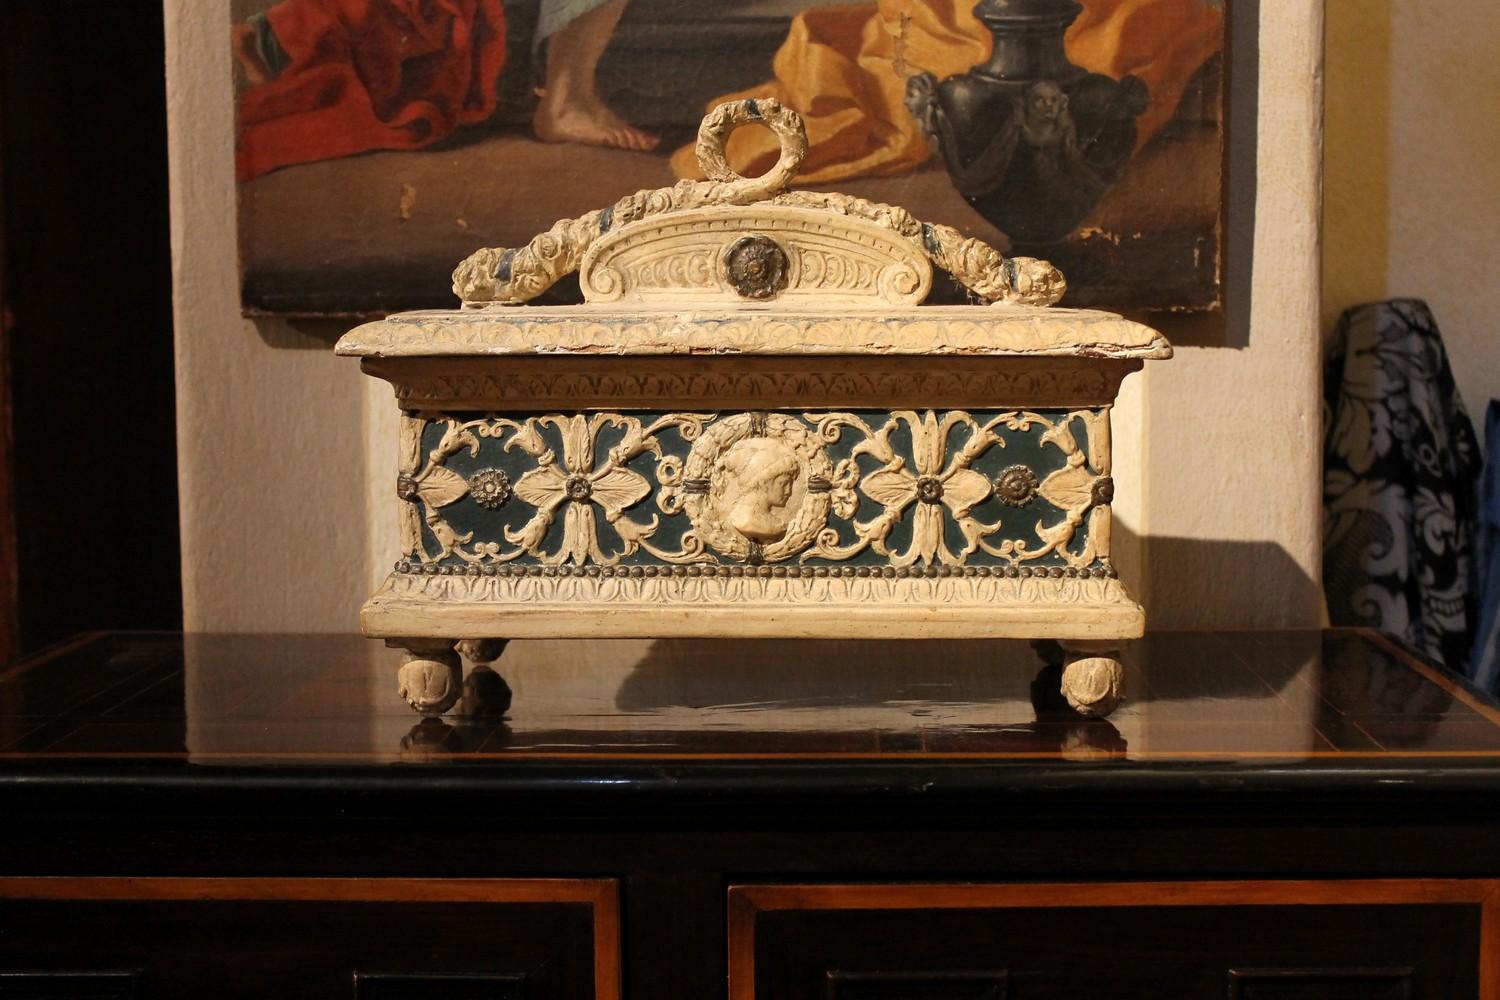 This beautiful 19th century Florentine rectangular lidded box is entirely decorated in the round with all typical Renaissance Italian patterns. The white hand painted and lacquer wooden structure centered by a large blue painted band is worked with